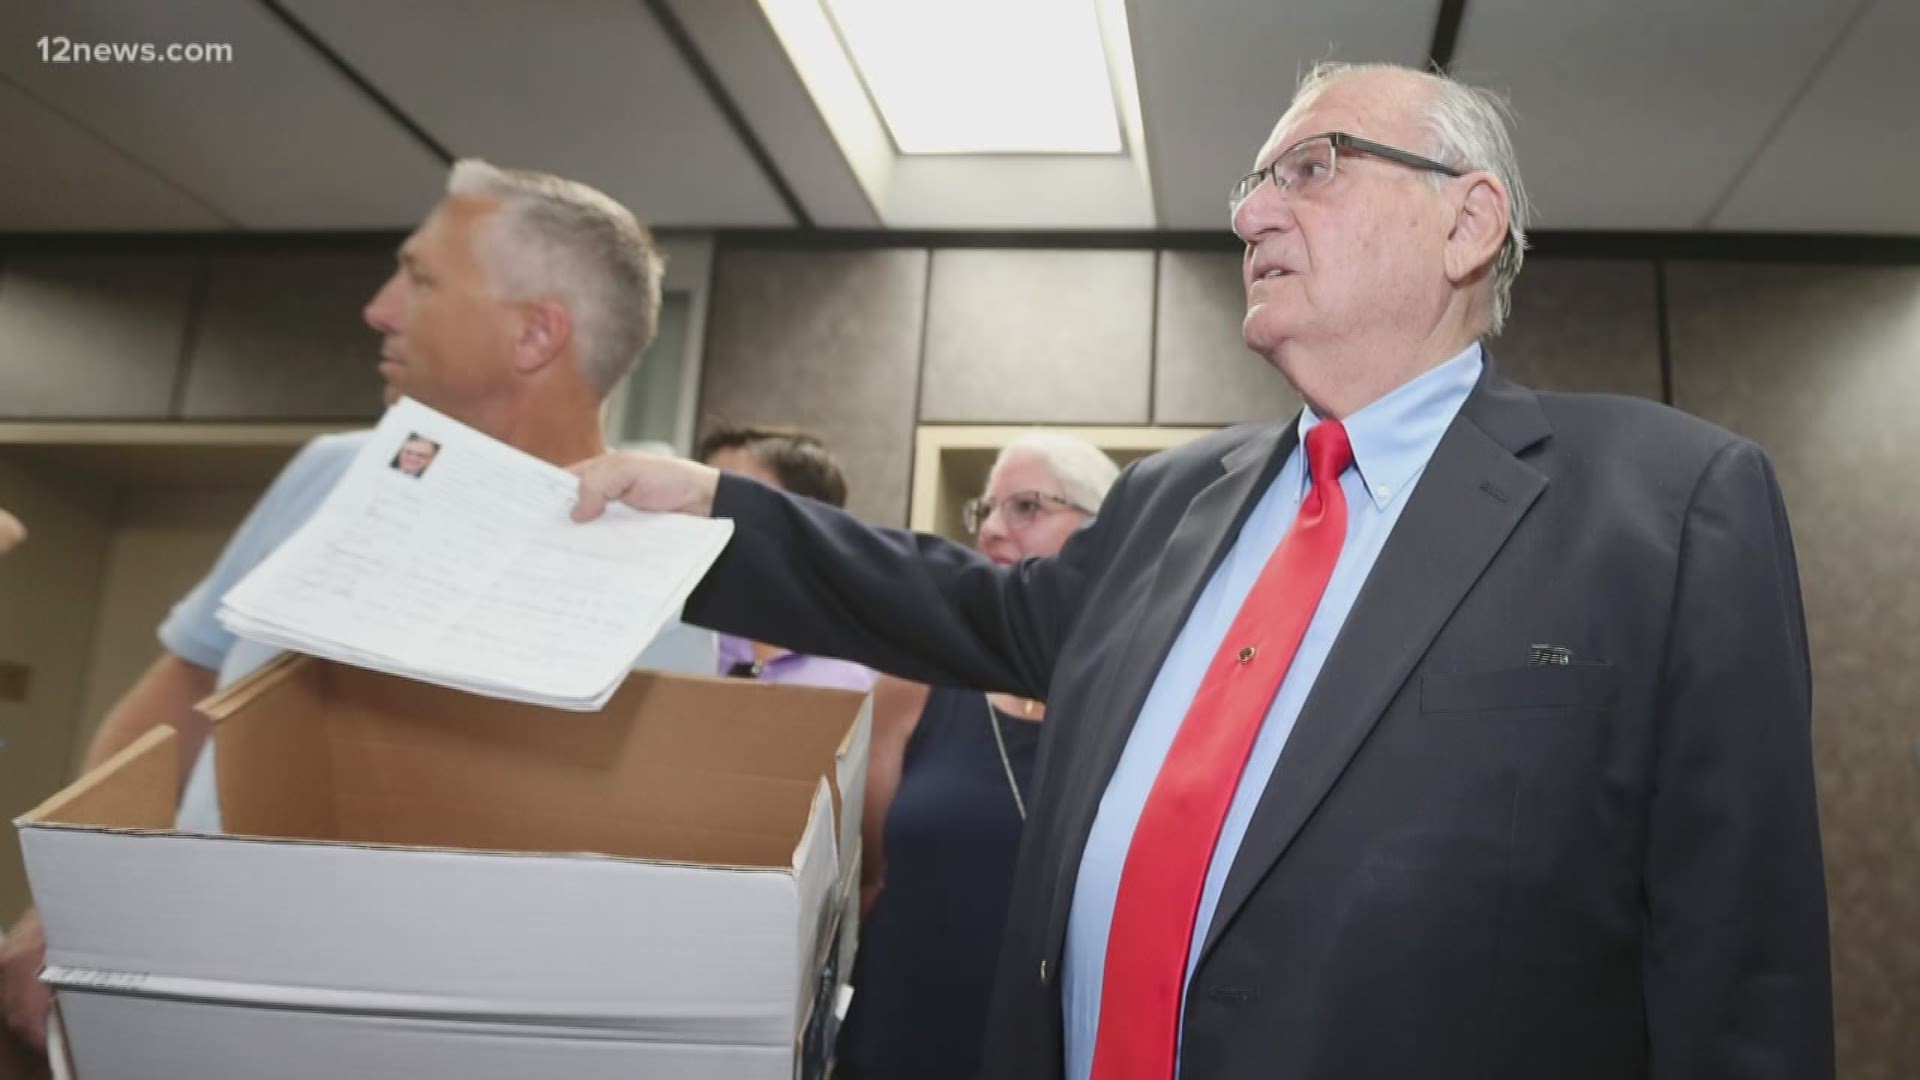 Former MCSO Sheriff Joe Arpaio is moving ahead with his political plans, turning in more than enough petition signatures to appear on Republican primary ballot in the race to replace Sen. Flake.